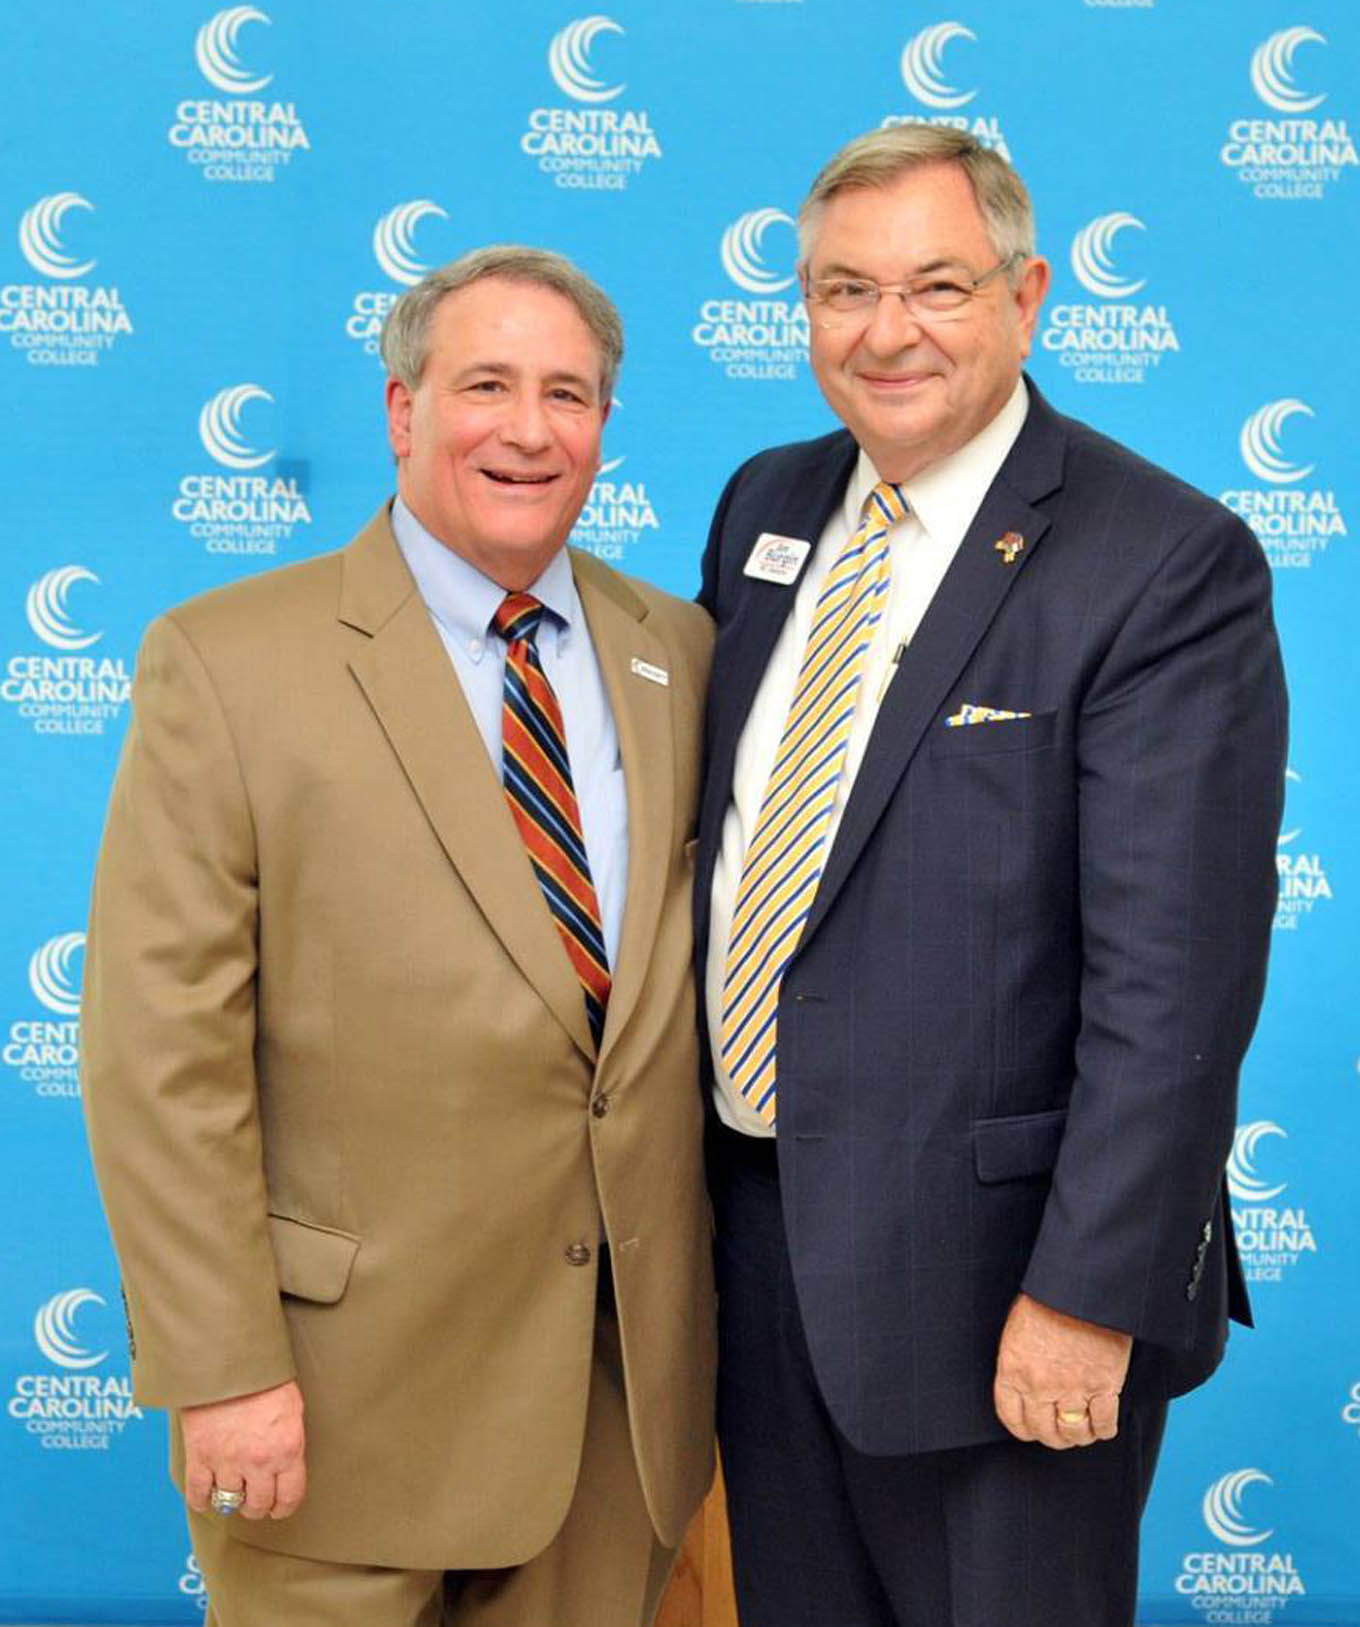 Click to enlarge,  Julian Philpott (left) and Jim Burgin (right) have been reappointed as Chairman and Vice Chairman, respectively, of the Central Carolina Community College Board of Trustees for 2021-2022. 